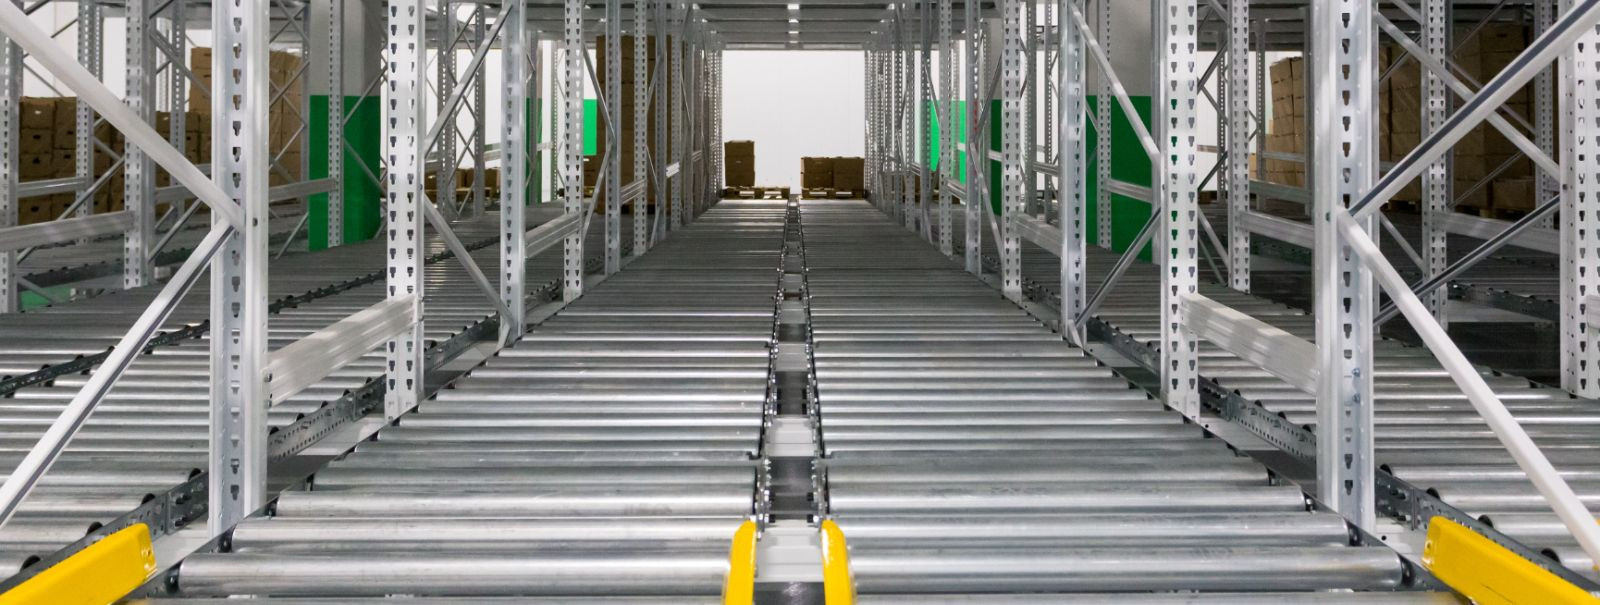 Flexible warehouse solutions are a modern approach to storage and distribution that allow businesses to adapt their warehousing needs to their current operation